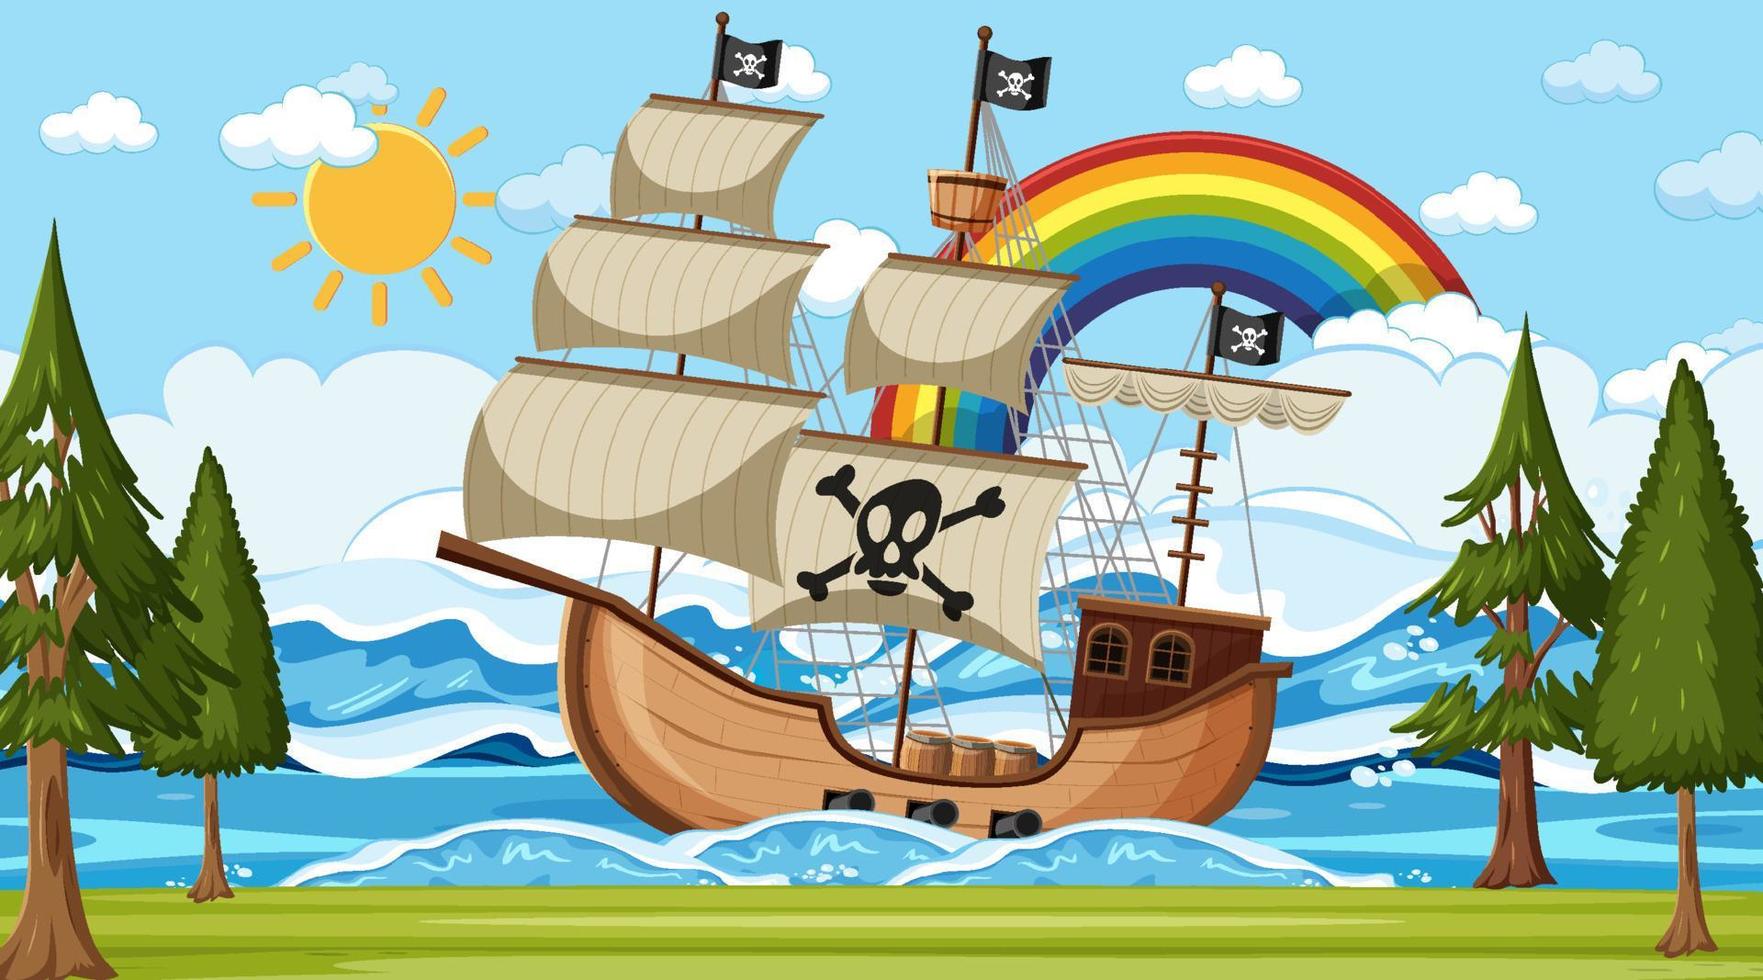 Ocean with Pirate ship at day time scene in cartoon style vector